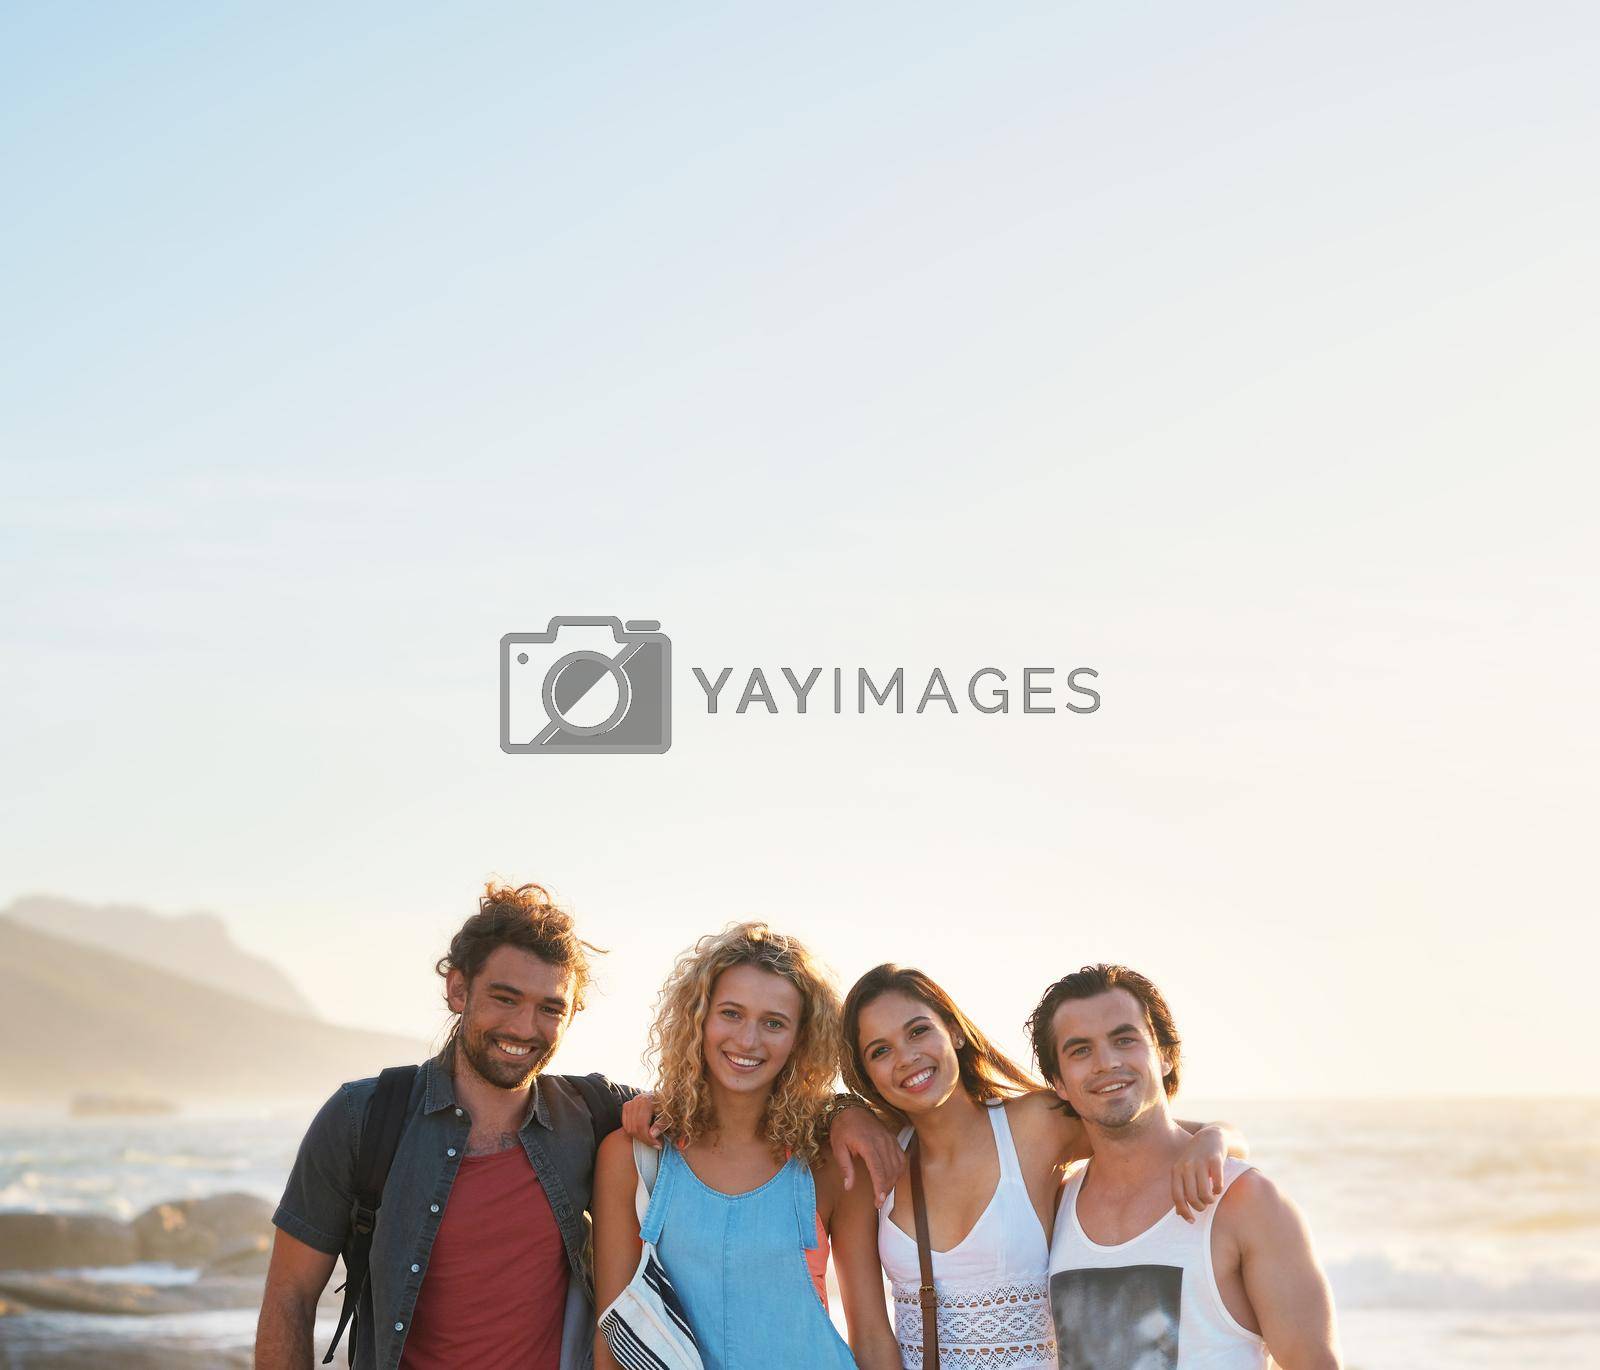 group of friends posing on beach having fun summer vacation lifestyle on seaside at sunset.